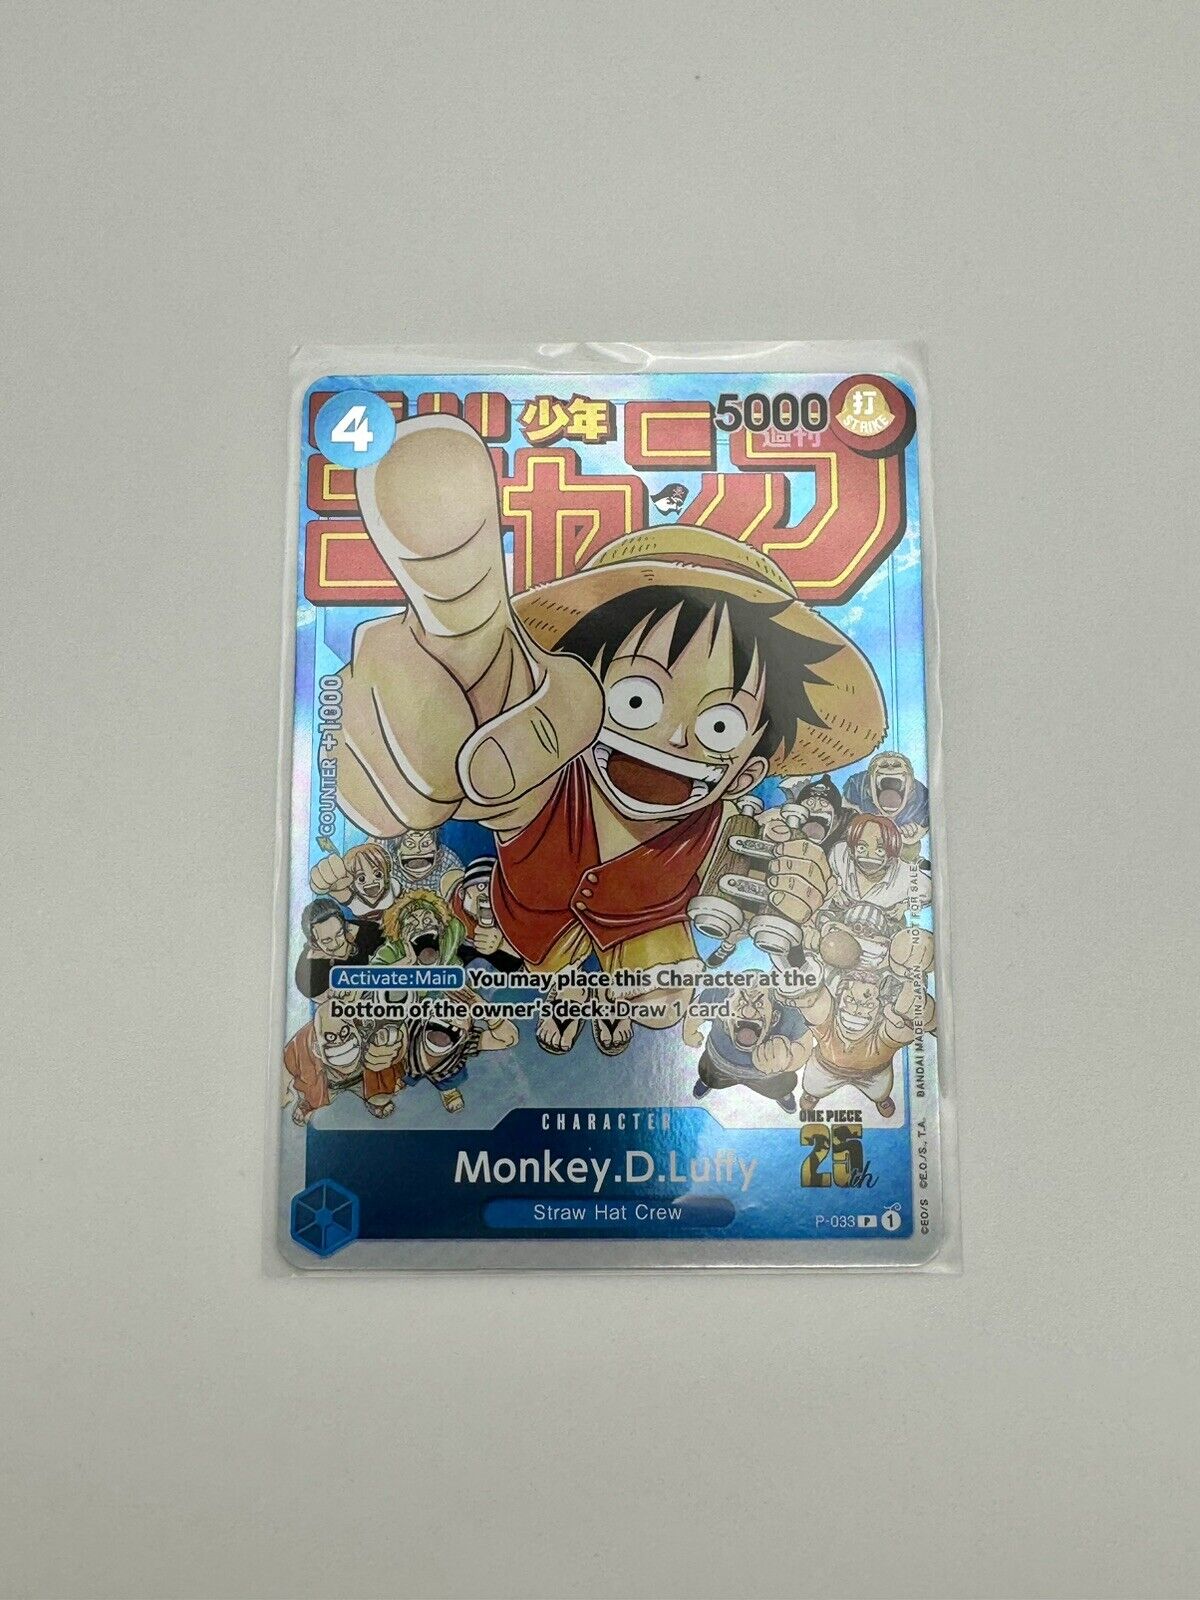 Monkey D Luffy - P-033 P Regional Event Pack Promo - One Piece Card Game